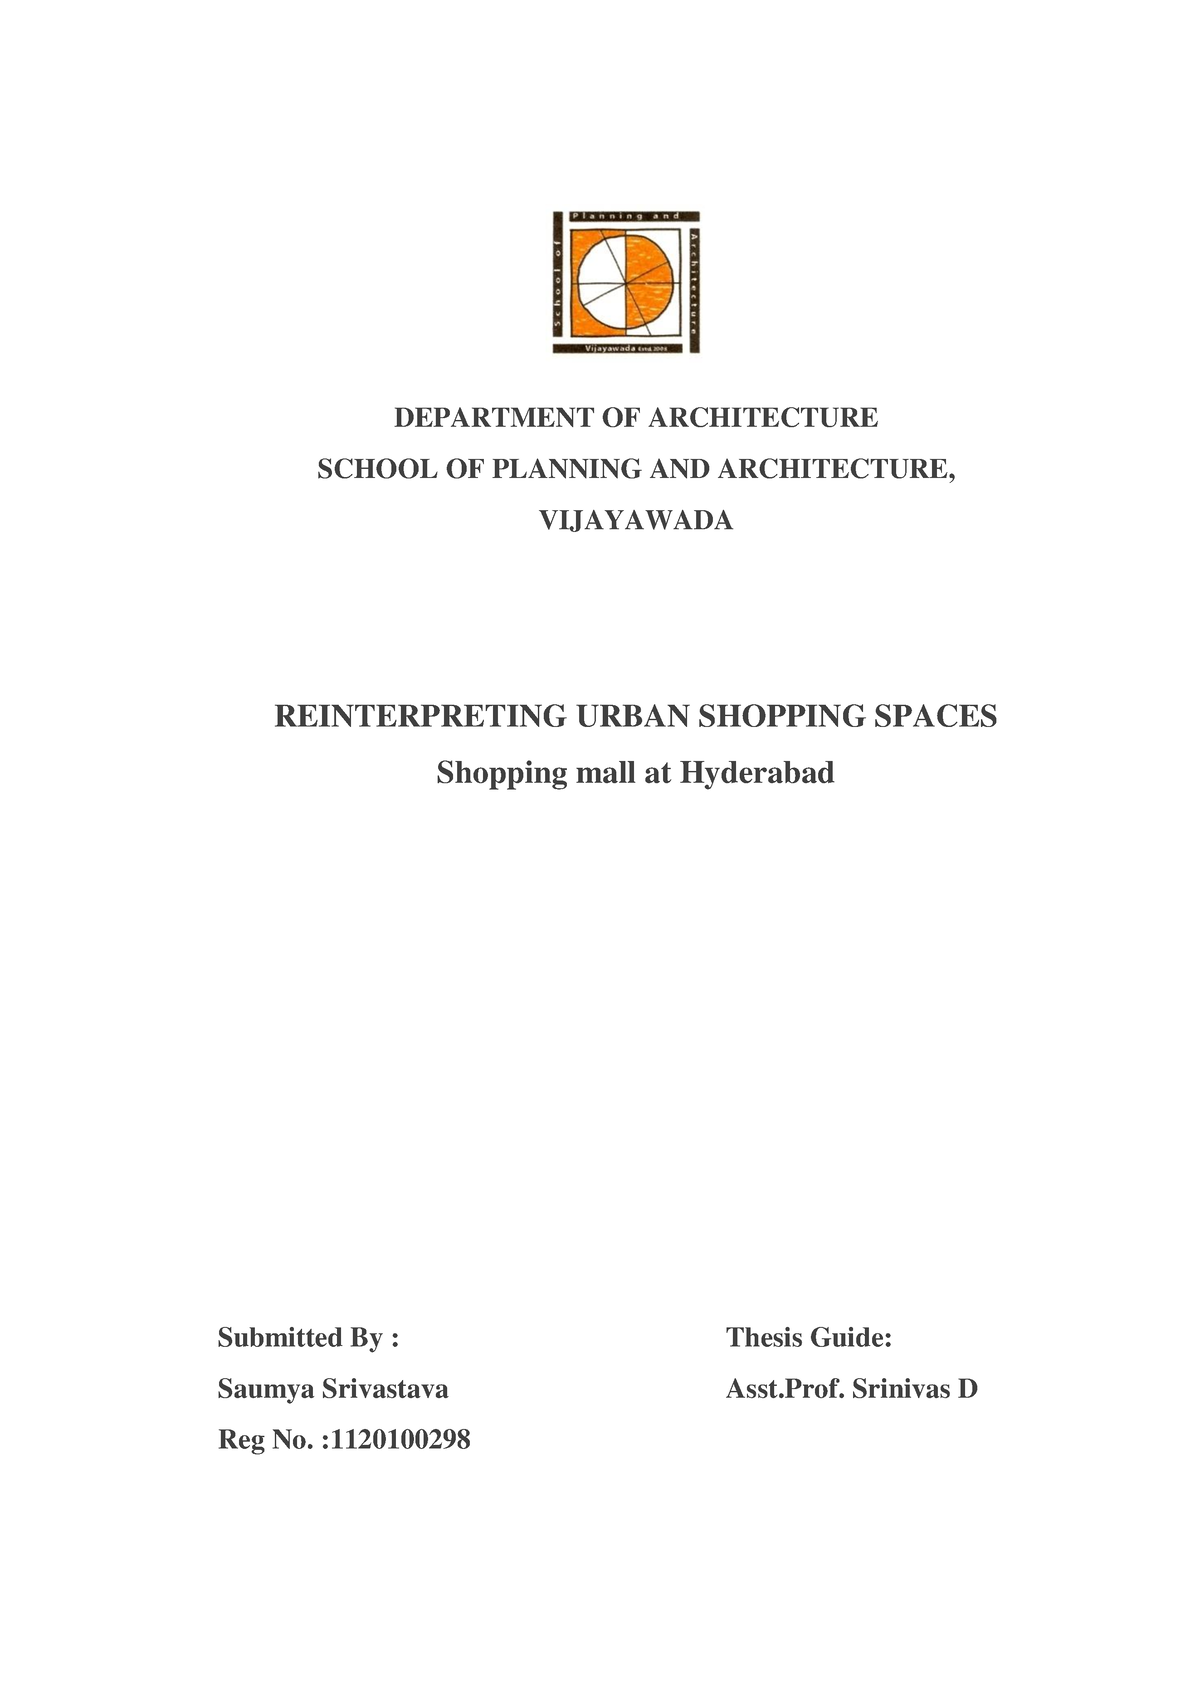 architectural thesis report pdf